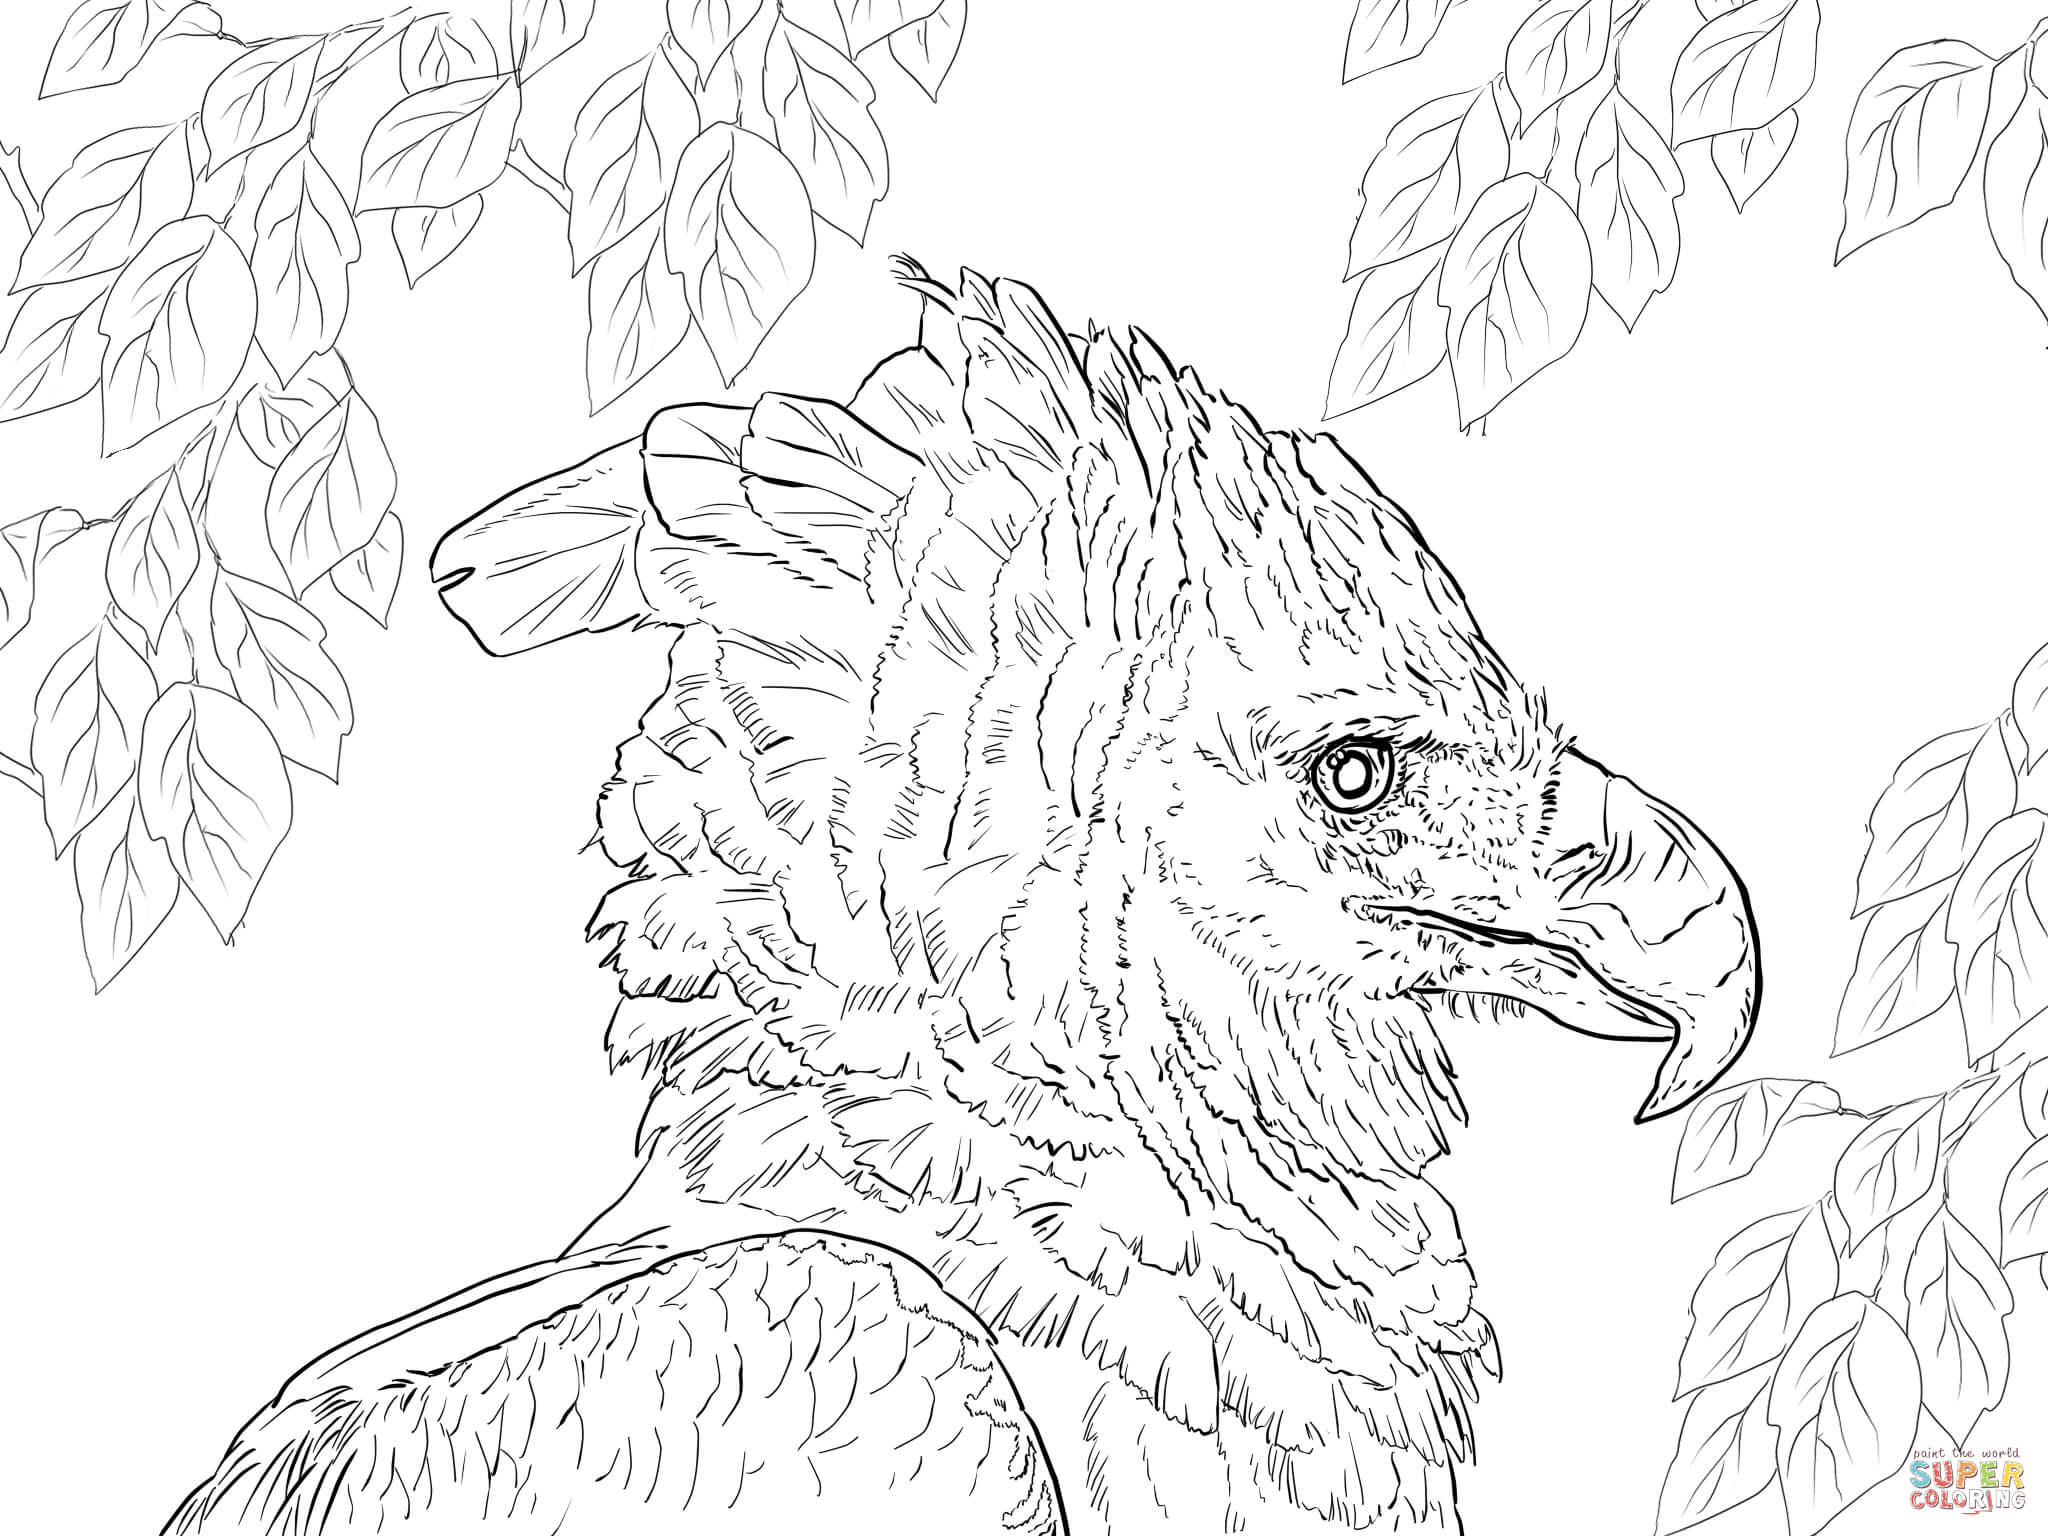 Phillipine Eagle coloring #7, Download drawings